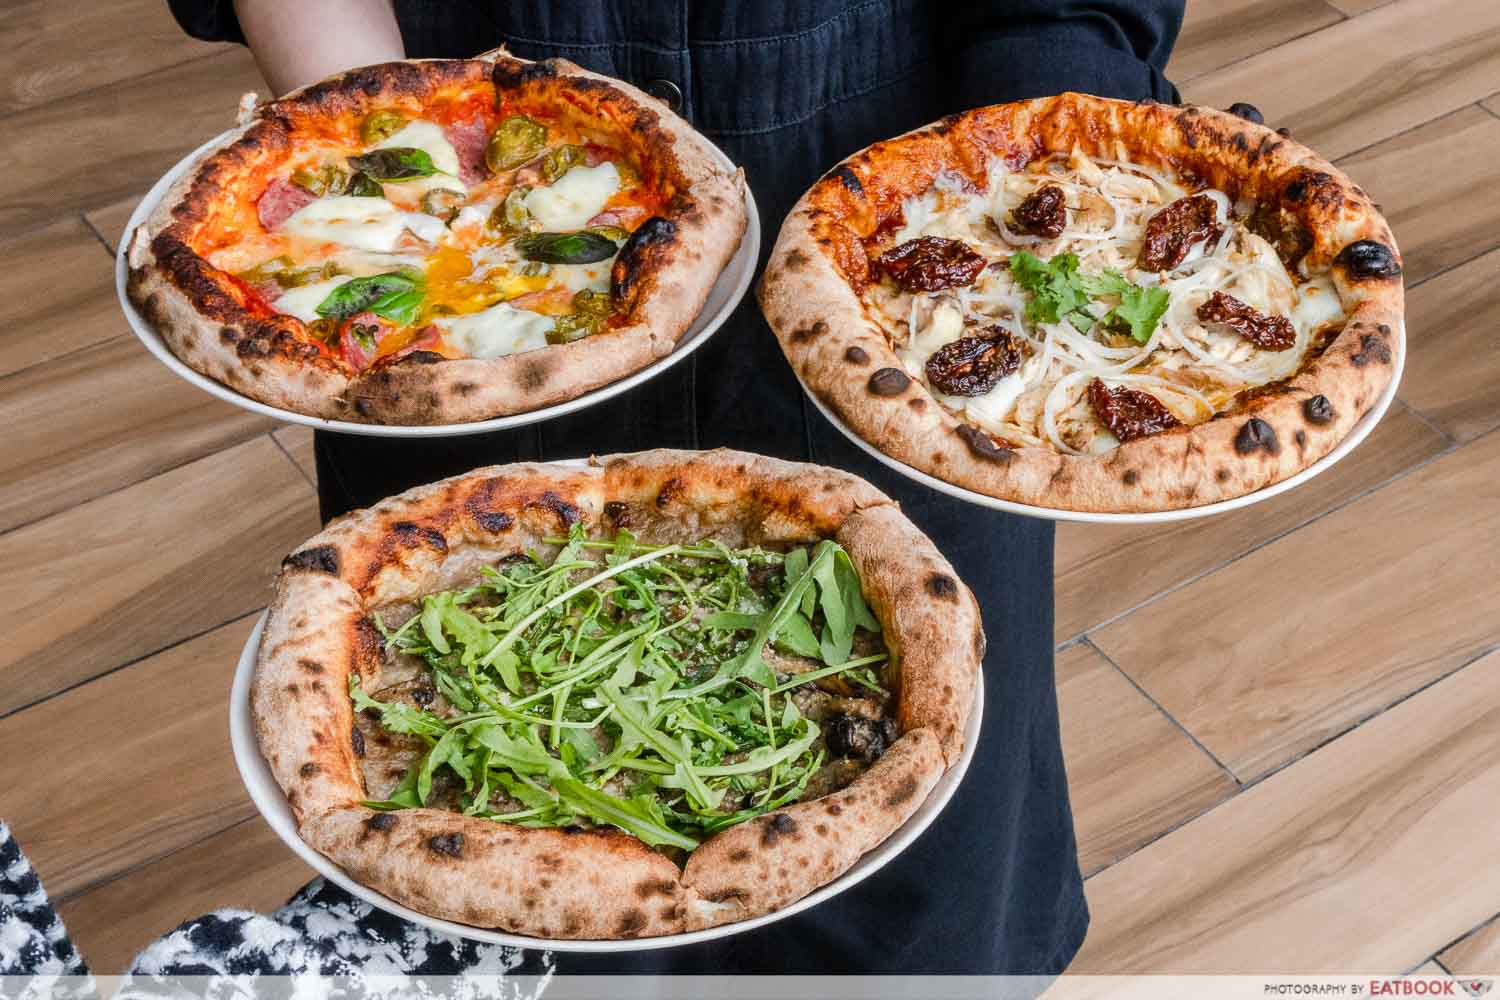 800° Woodfired Kitchen Review: New Muslim-Owned Pizza Cafe With Truffle Sauce Base At Nett Prices